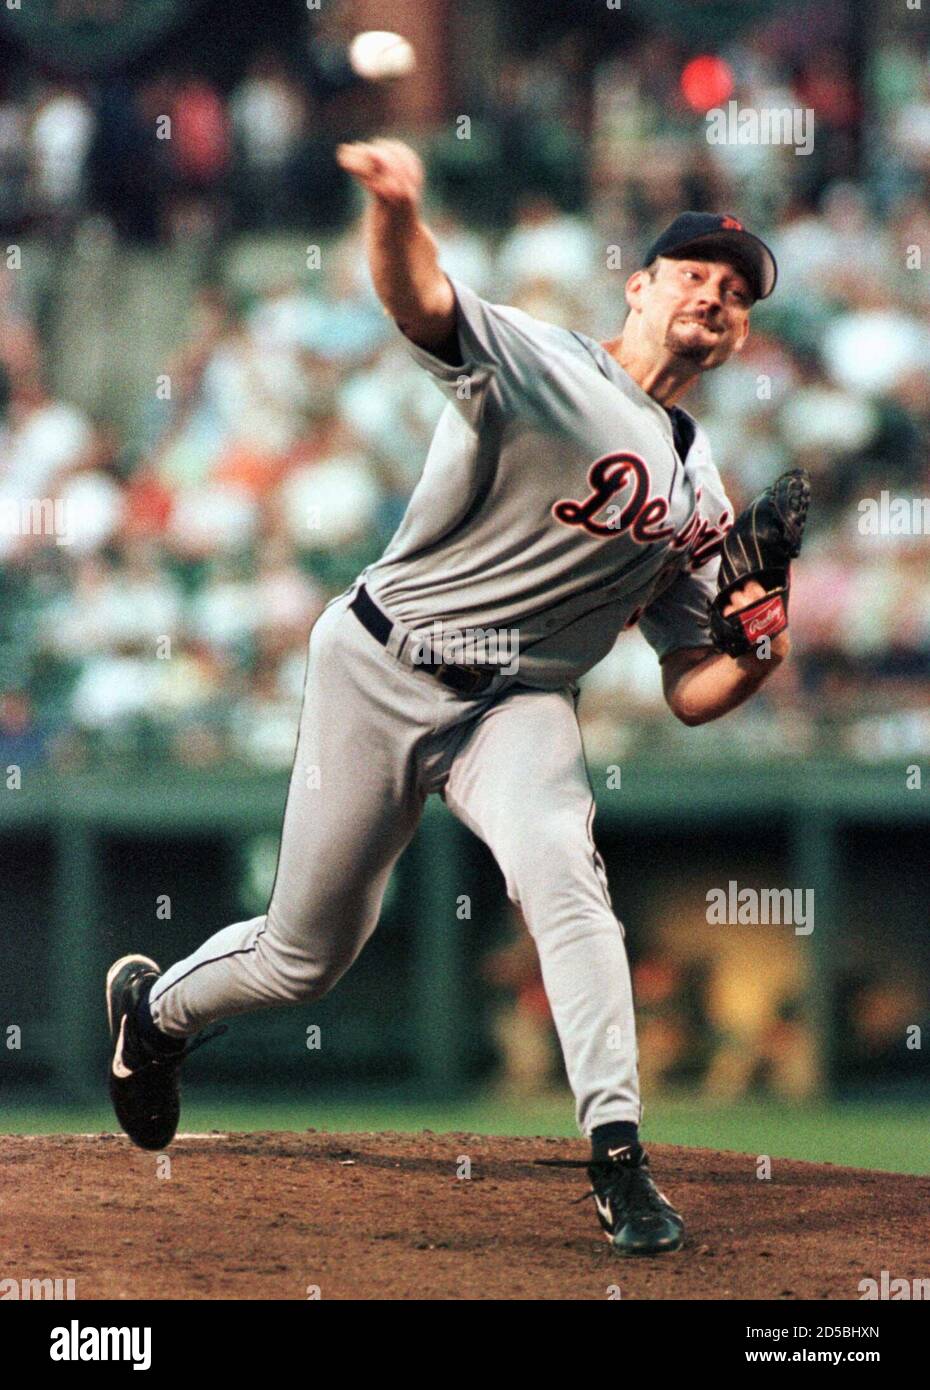 Detroit Tigers Pitcher Dave Mlicki Delivers A Pitch Against The